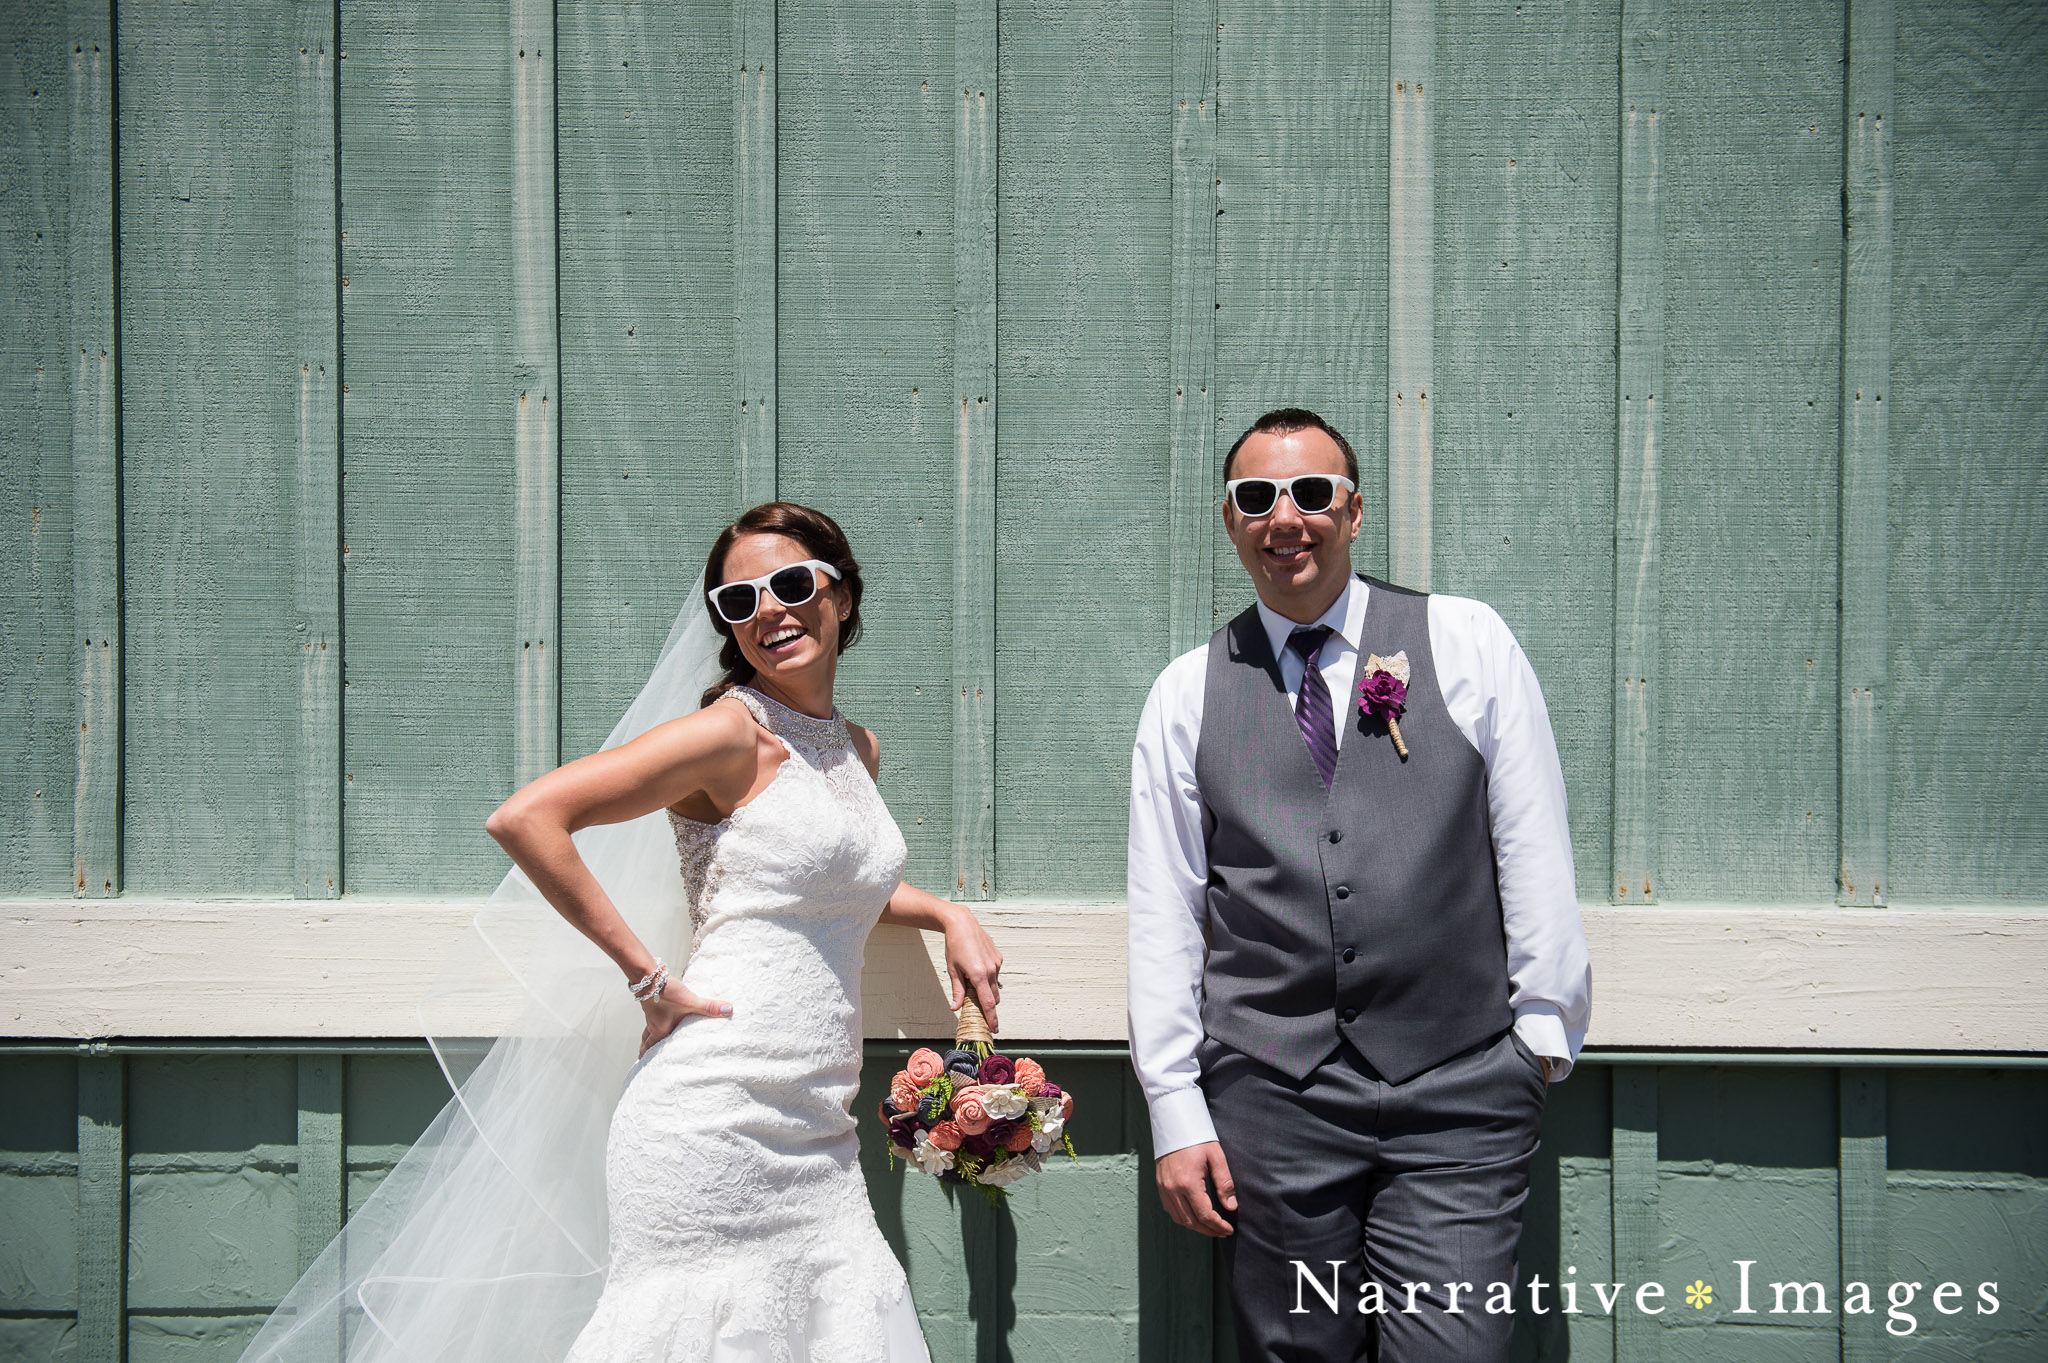 Wedding couple with sunglasses on against rustic wall for creative wedding photos in temecula ca